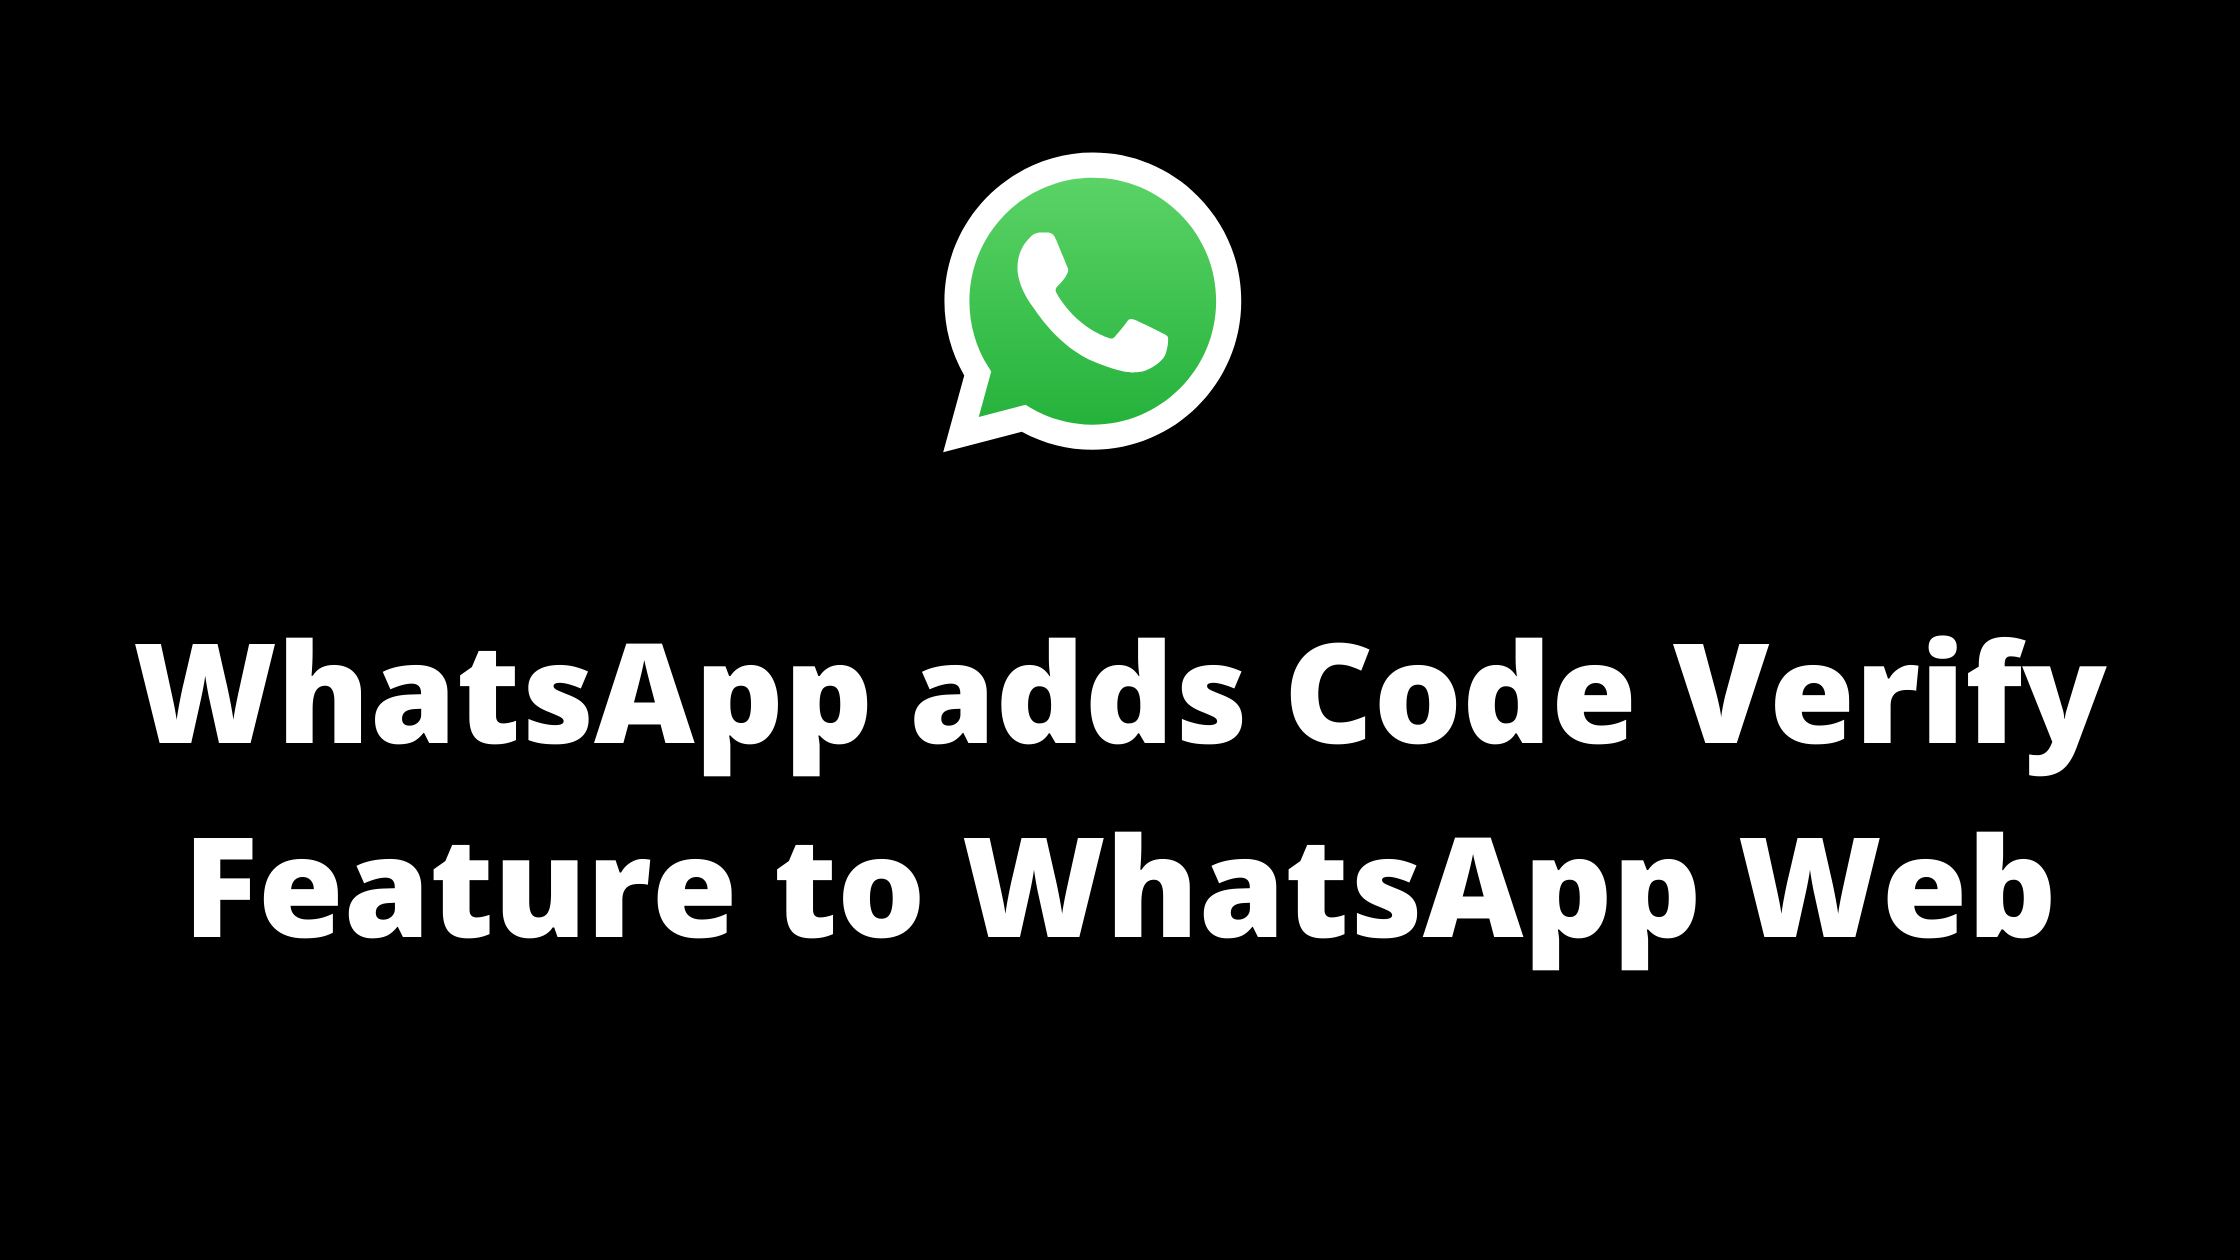 whatsapp adds code verify feature